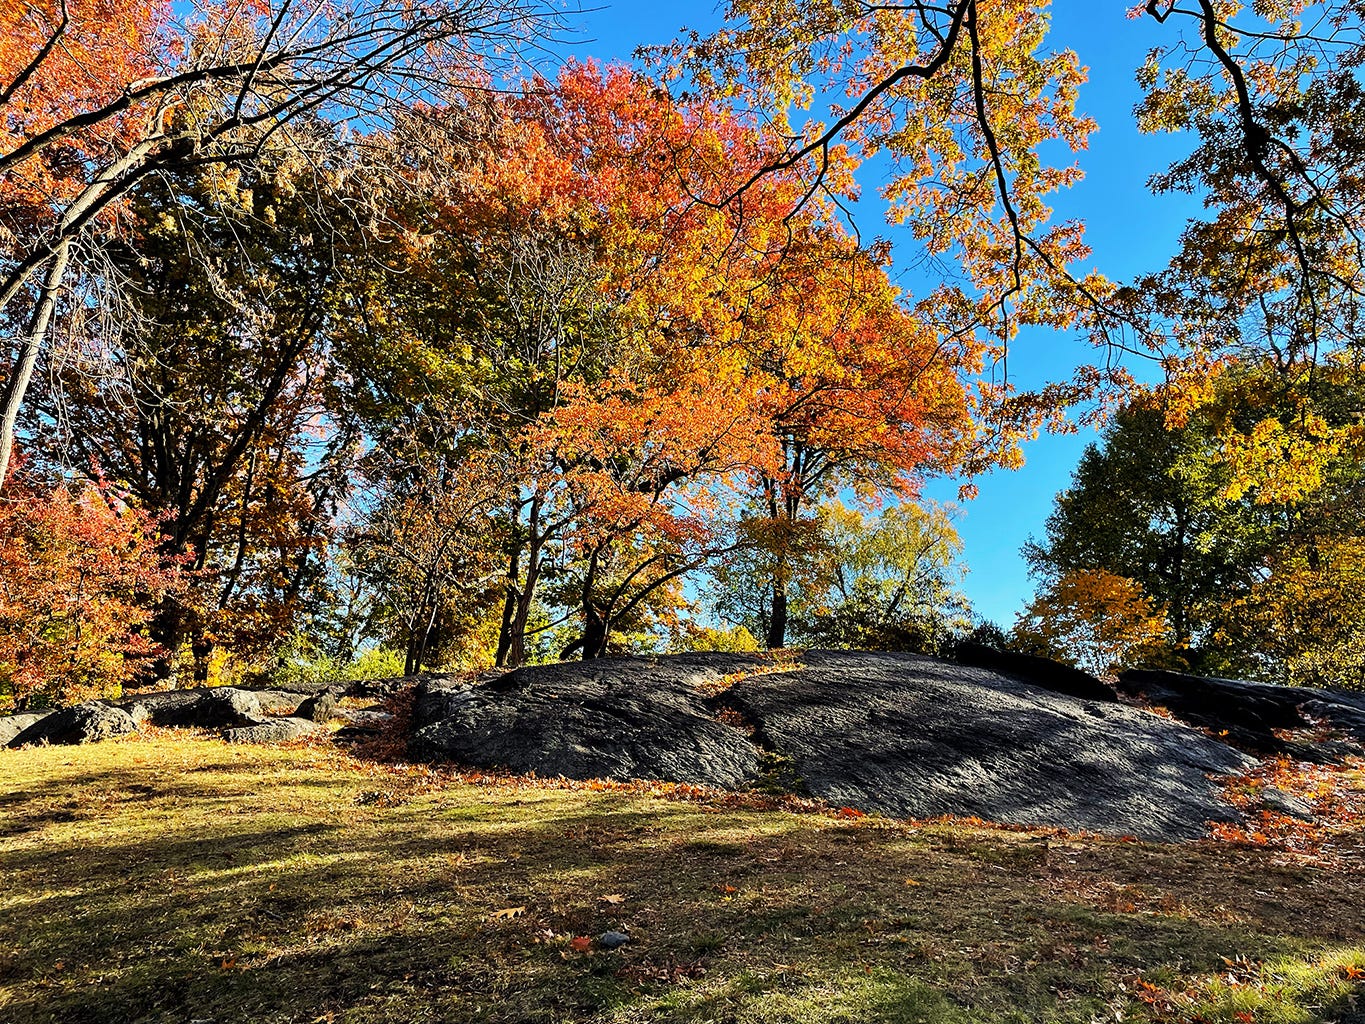 Rocky outcrops in Central Park, just south of the site where Seneca Village once stood. A beautiful blue sky shines through autumn foliage.